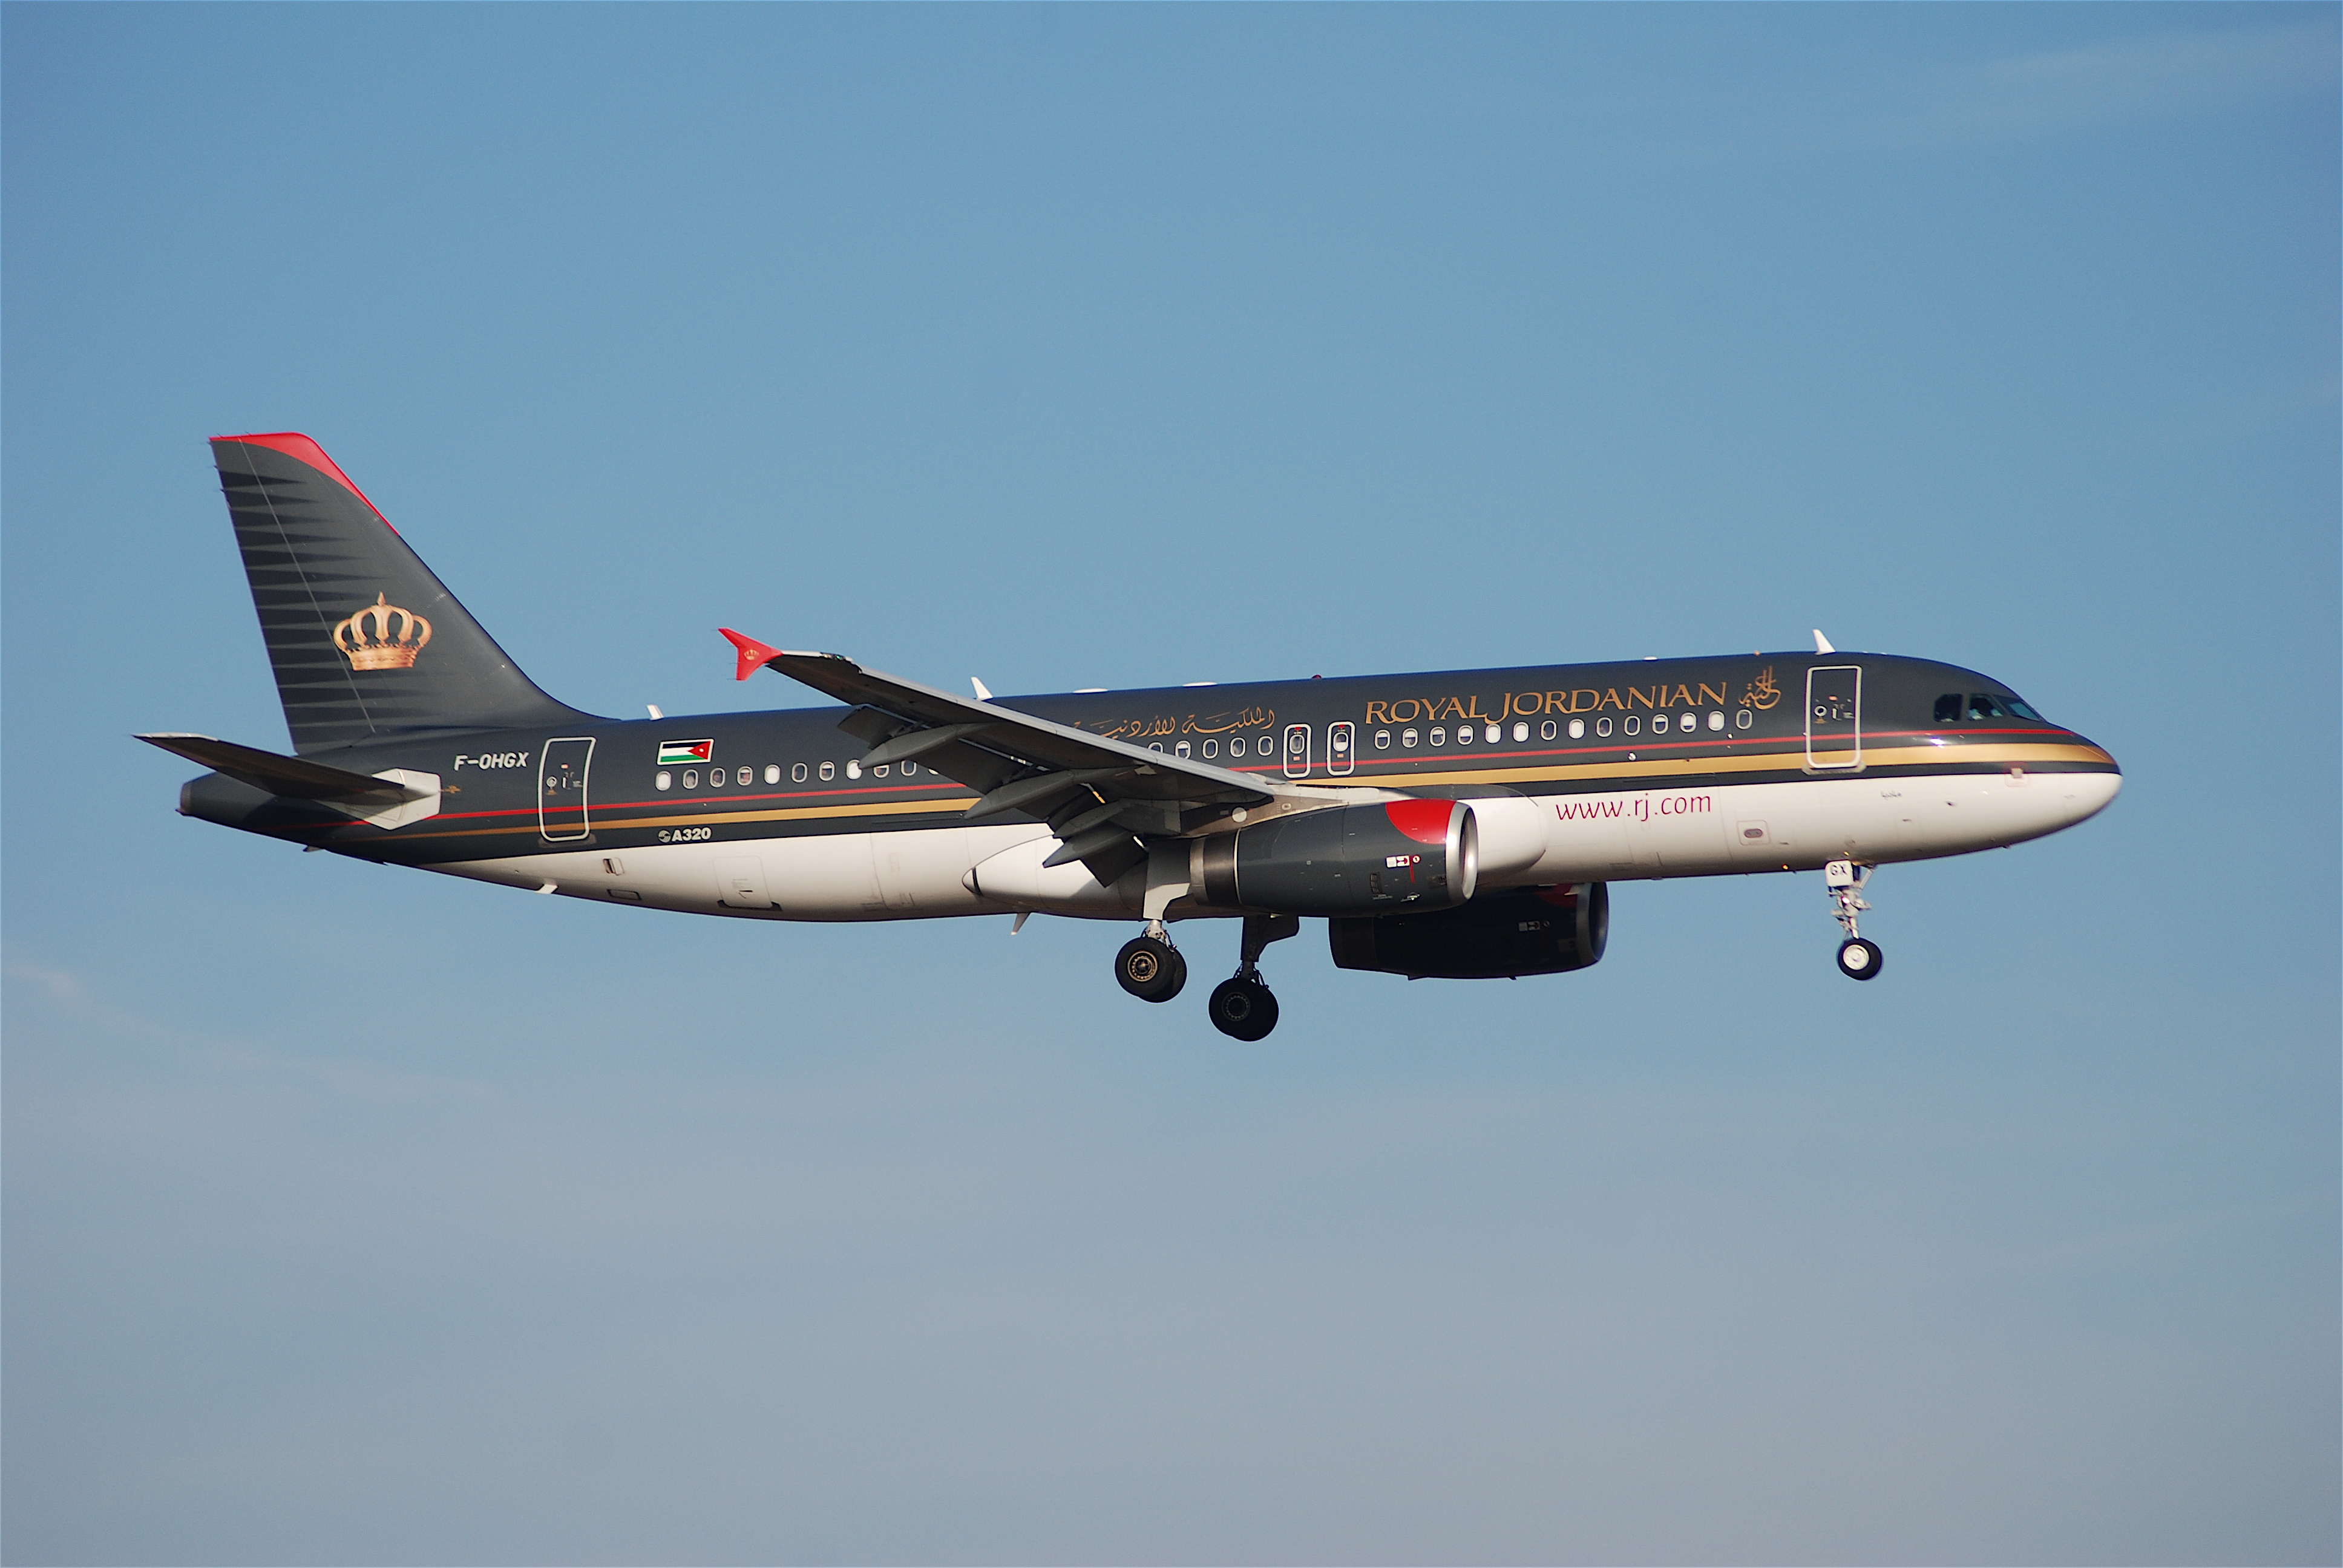 Royal Jordanian Airlines Airbus A320, F-OHGX@ZRH,26.01.2008-494er - Flickr - Aero Icarus